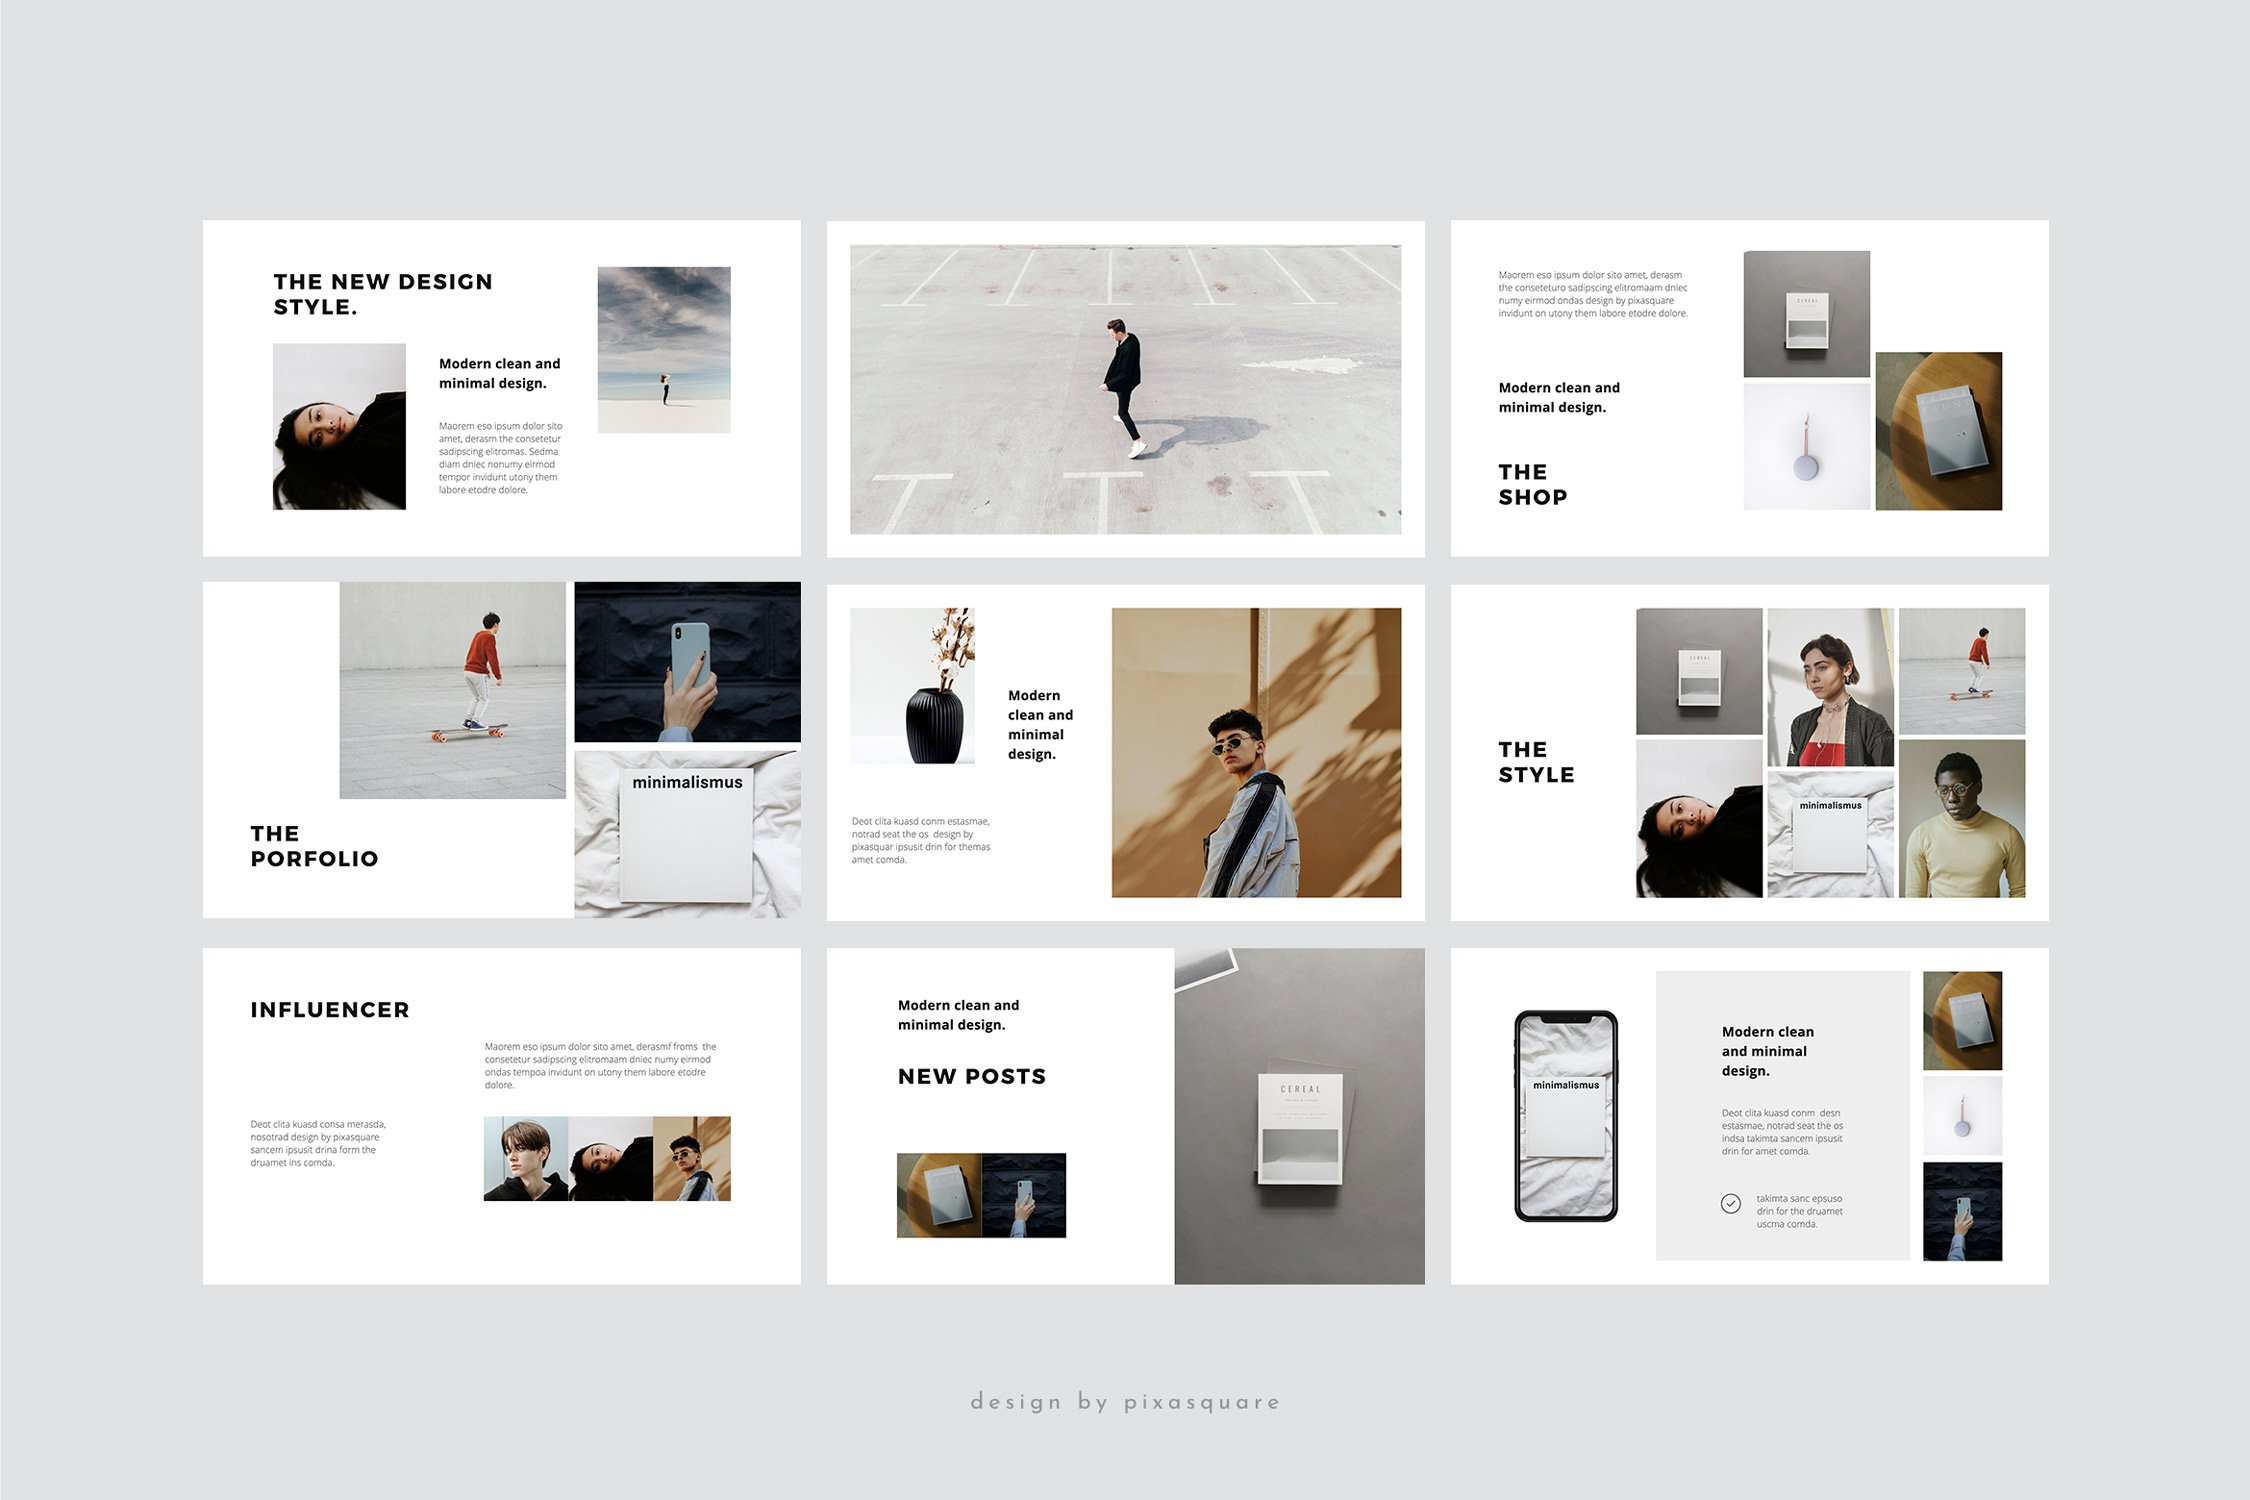 Cool minimalistic template for nice visual materials.